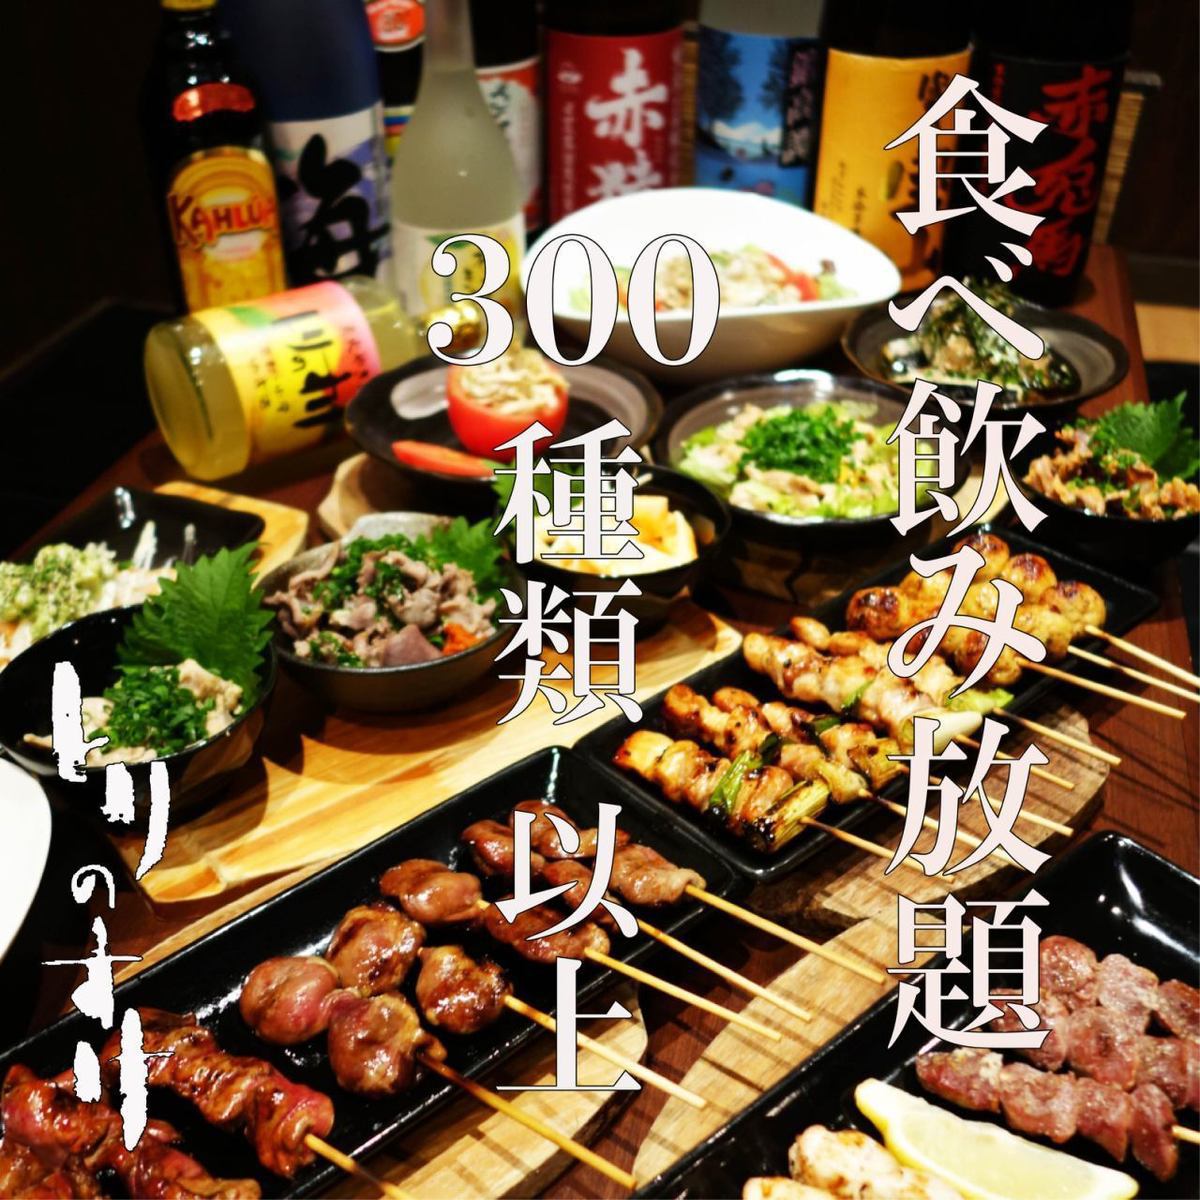 ≪Torinosuke's all-you-can-eat yakitori!≫All-you-can-eat and drink for 3,600 yen from Sunday to Thursday